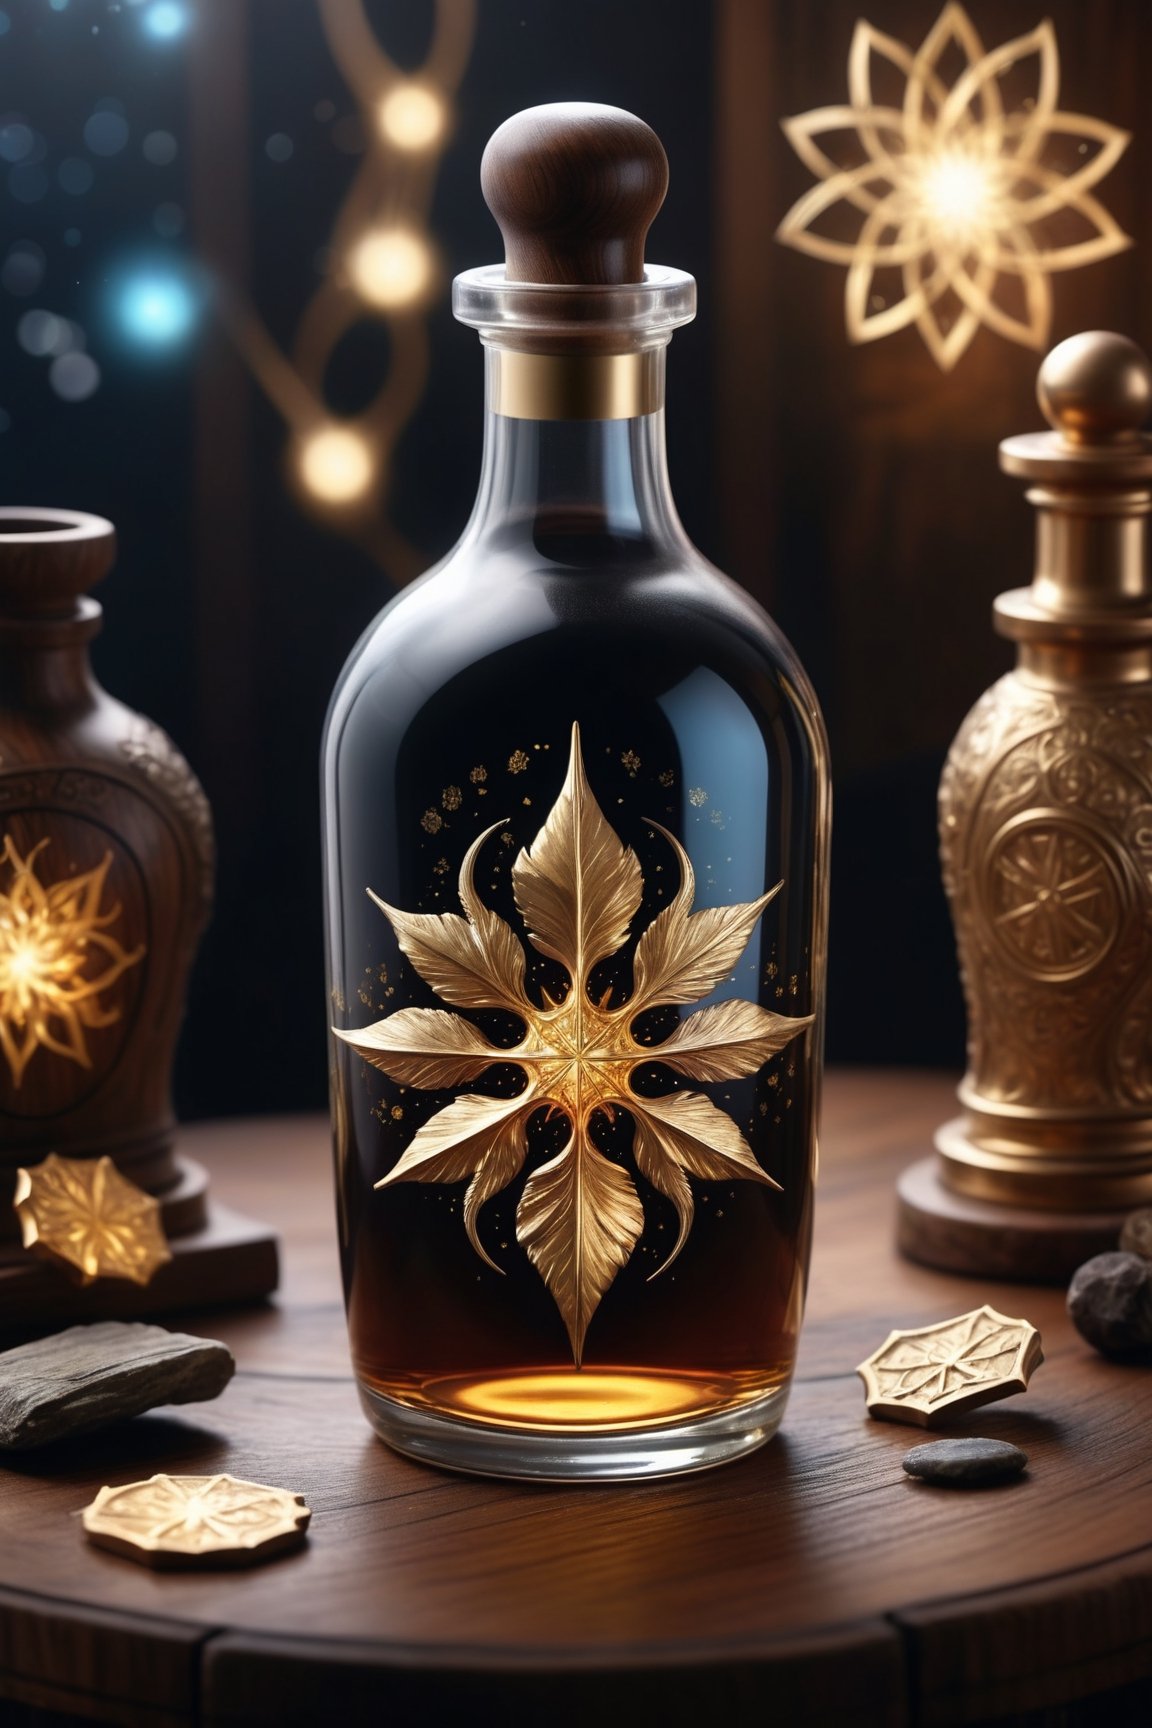 crystal [bottle|volumetric potion flask] of liquid gold brandy healing potion, a glowing radiant cosmic plasma aurora galaxy swirling within it, sitting on an ancient dark hardwood desk with golden arcane symbols engraved along the edges, christmas theme, warm comfortable winter atmosphere